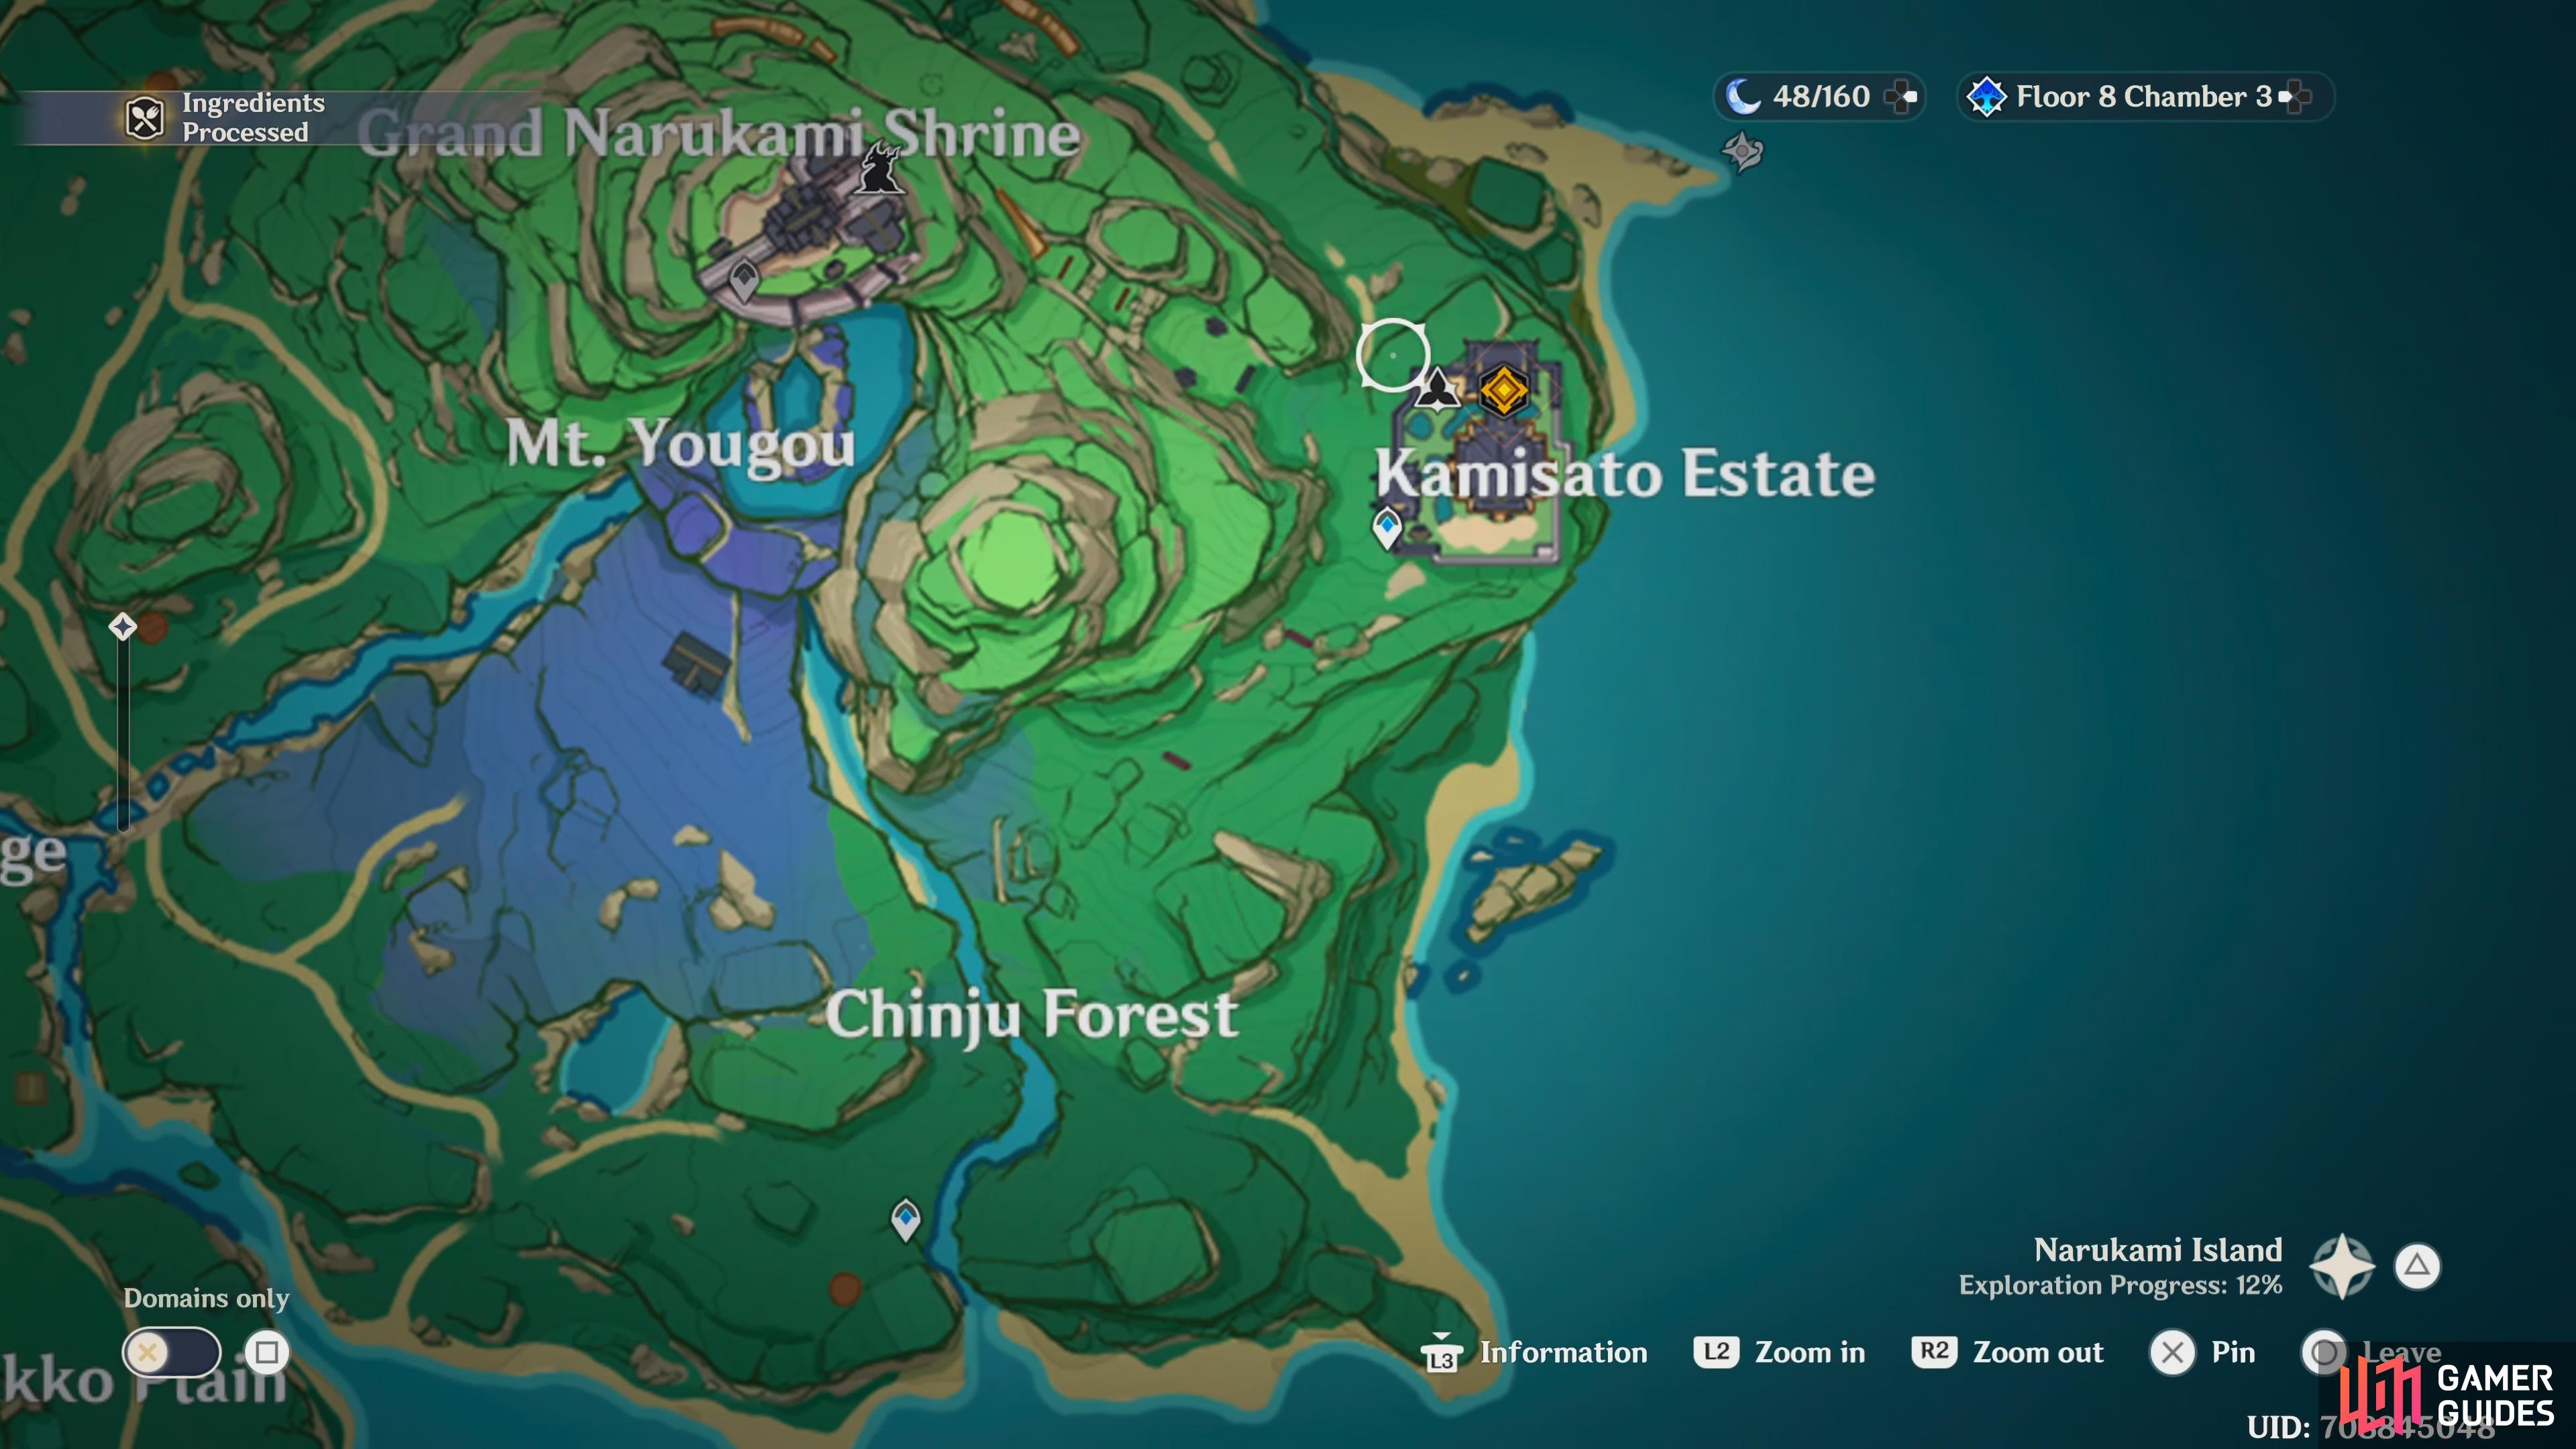 The Kamisato Estate can be found east of Mt. Yougou.